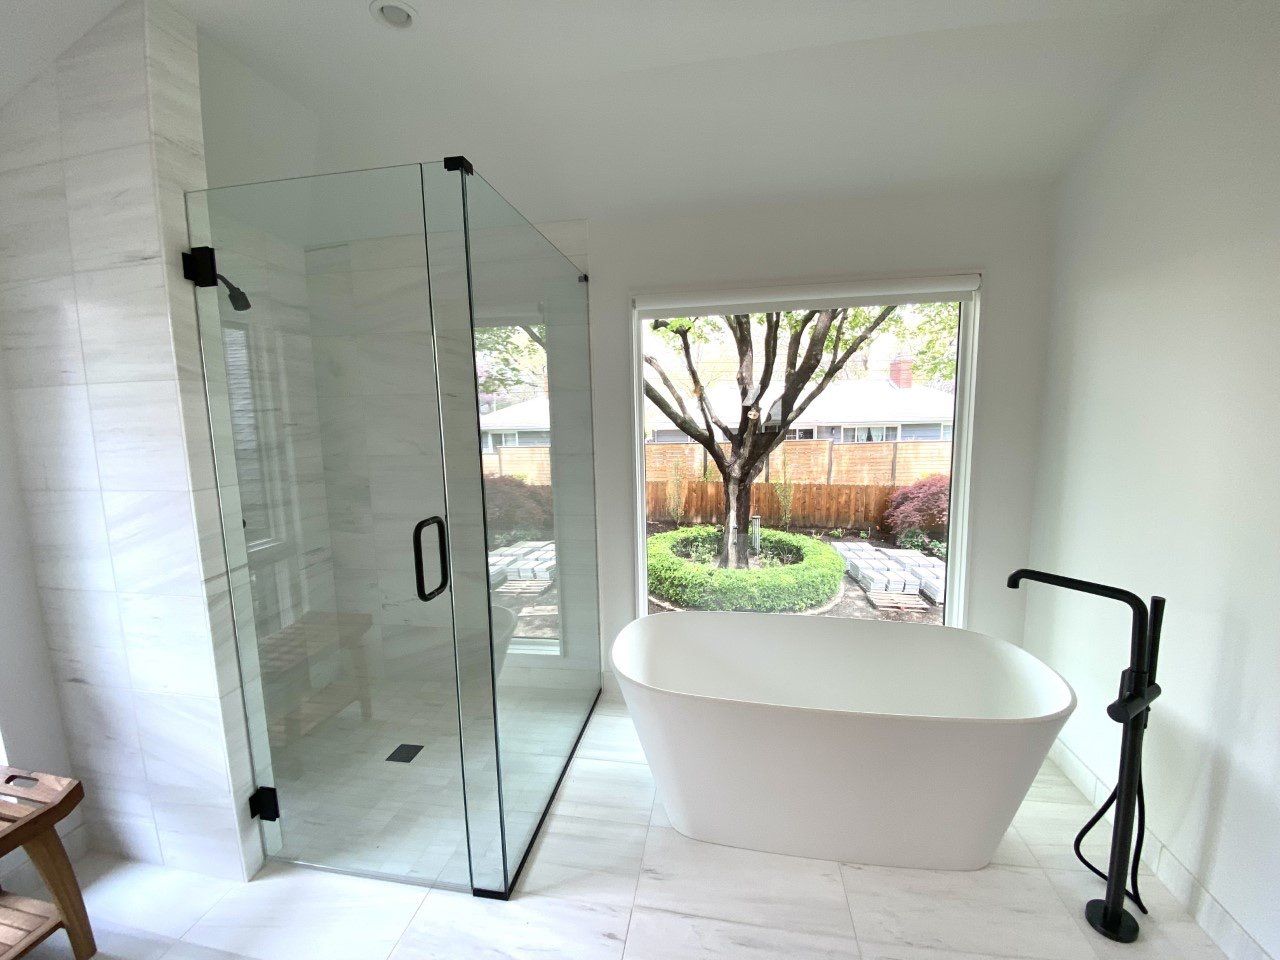 a bathroom remodel with a bathtub and a large window